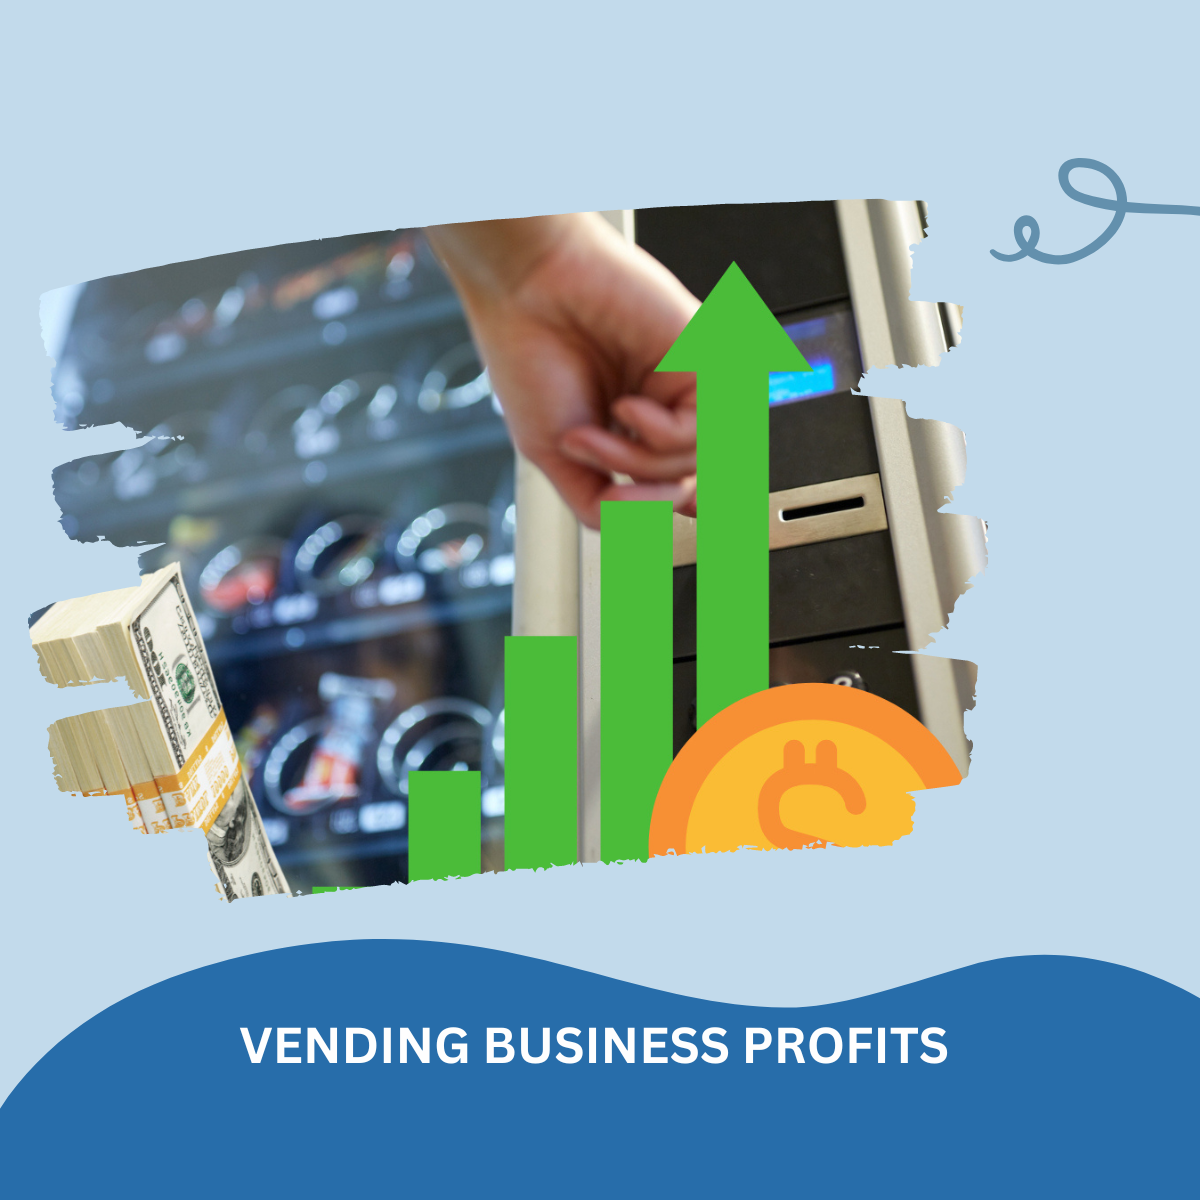 REAL TIME VENDING BUSINESS PROFITS – AN OVERVIEW